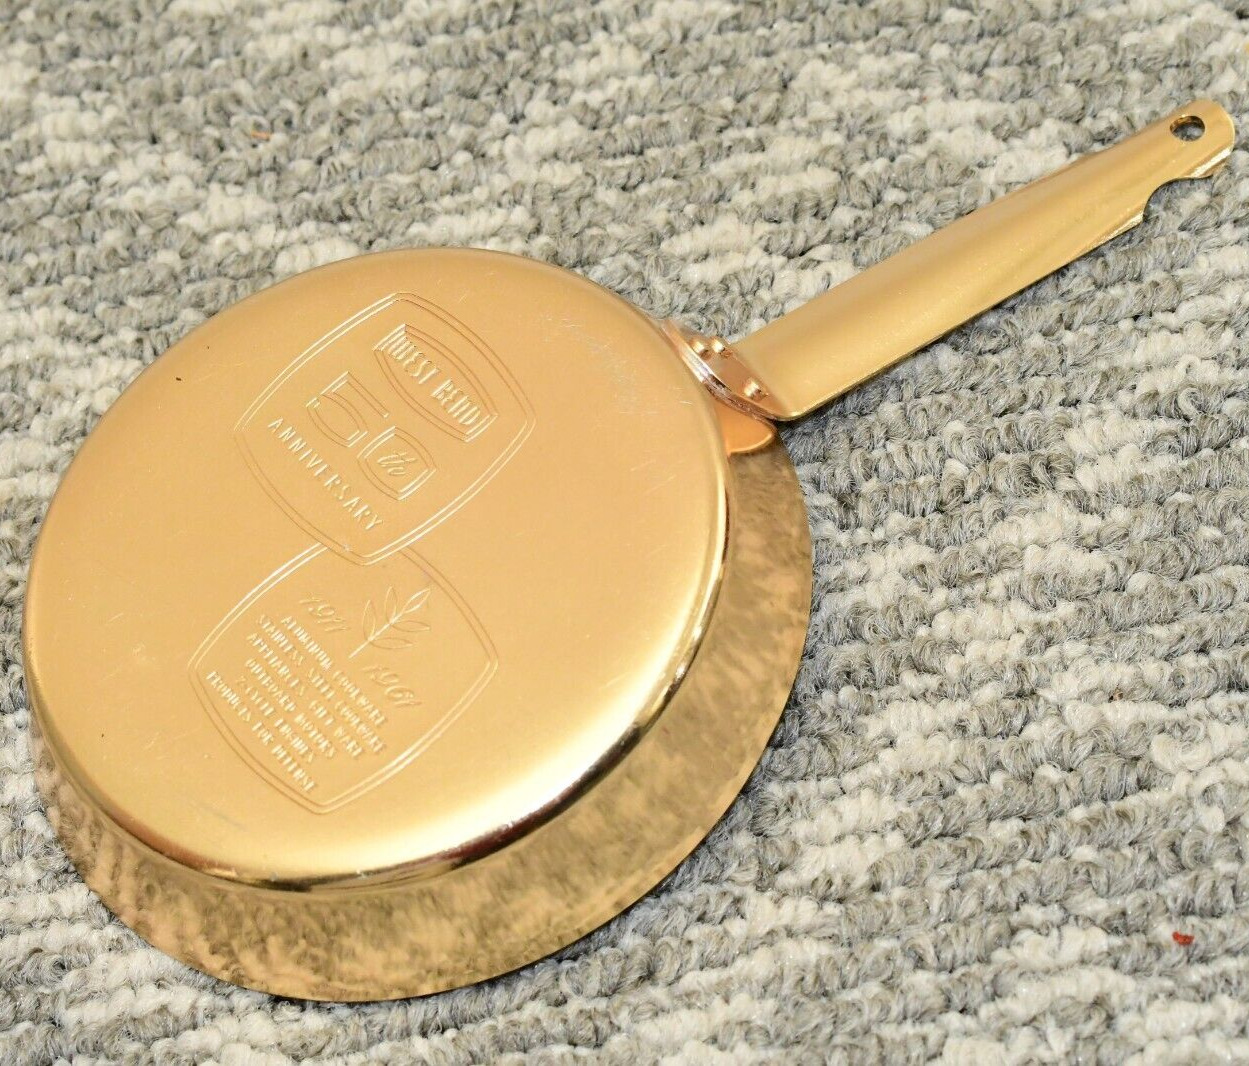 WEST BEND 1961 Miniature Replica of 1st Made Skillet in 1911 50th Anniversary